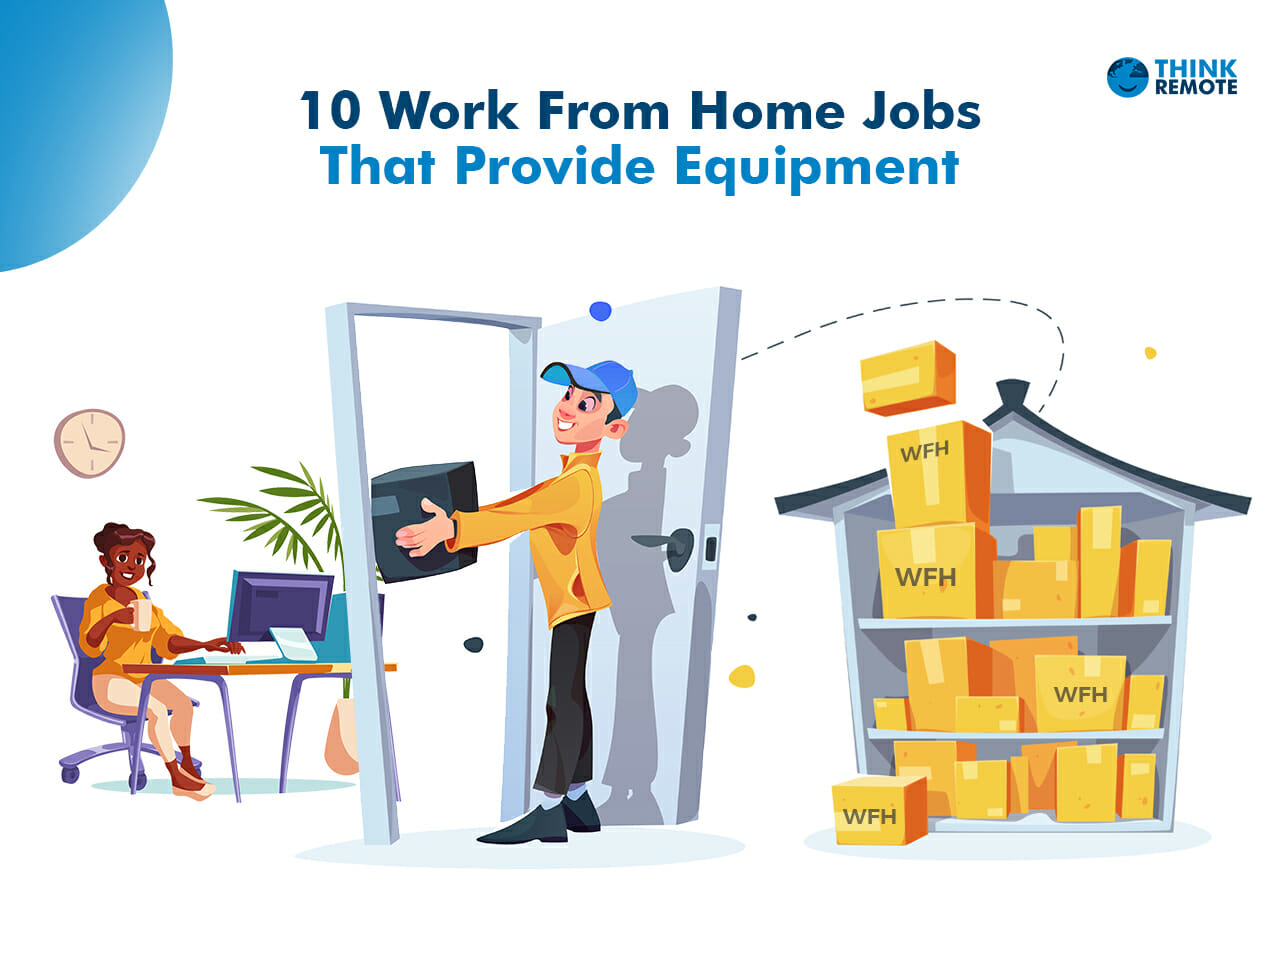 30 Top Work From Home Jobs Including Free Equipment